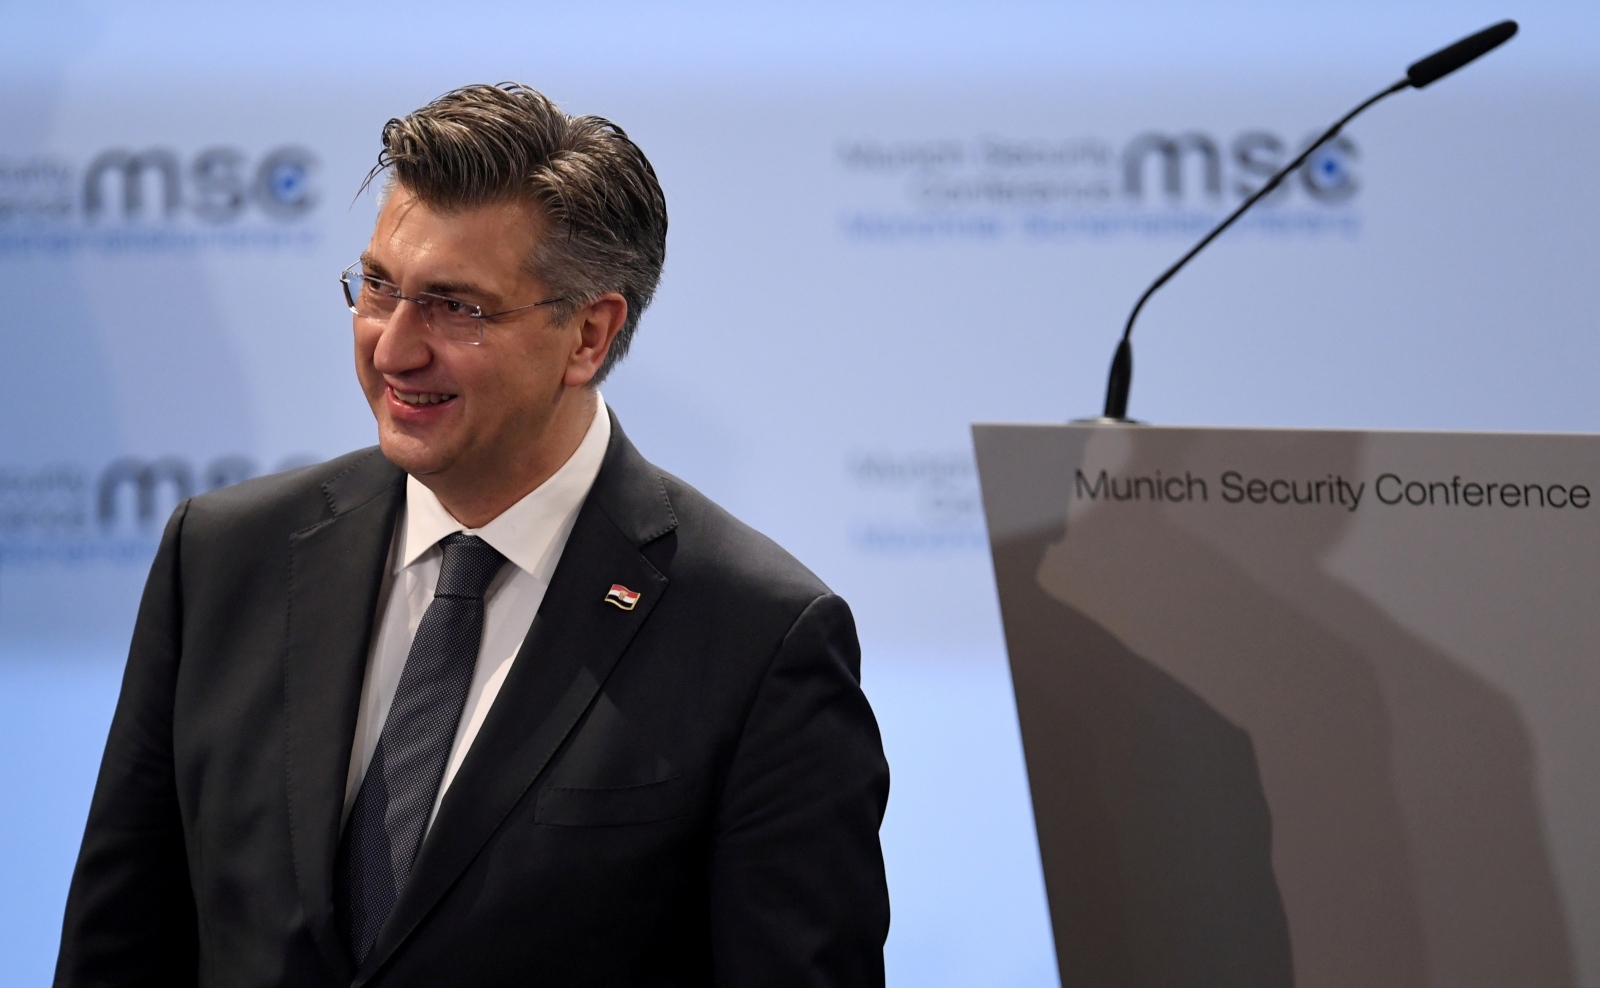 Munich Security Conference Croatia's Prime Minister Andrej Plenkovic smiles before a panel discussion during the annual Munich Security Conference in Germany February 16, 2020. REUTERS/Andreas Gebert ANDREAS GEBERT